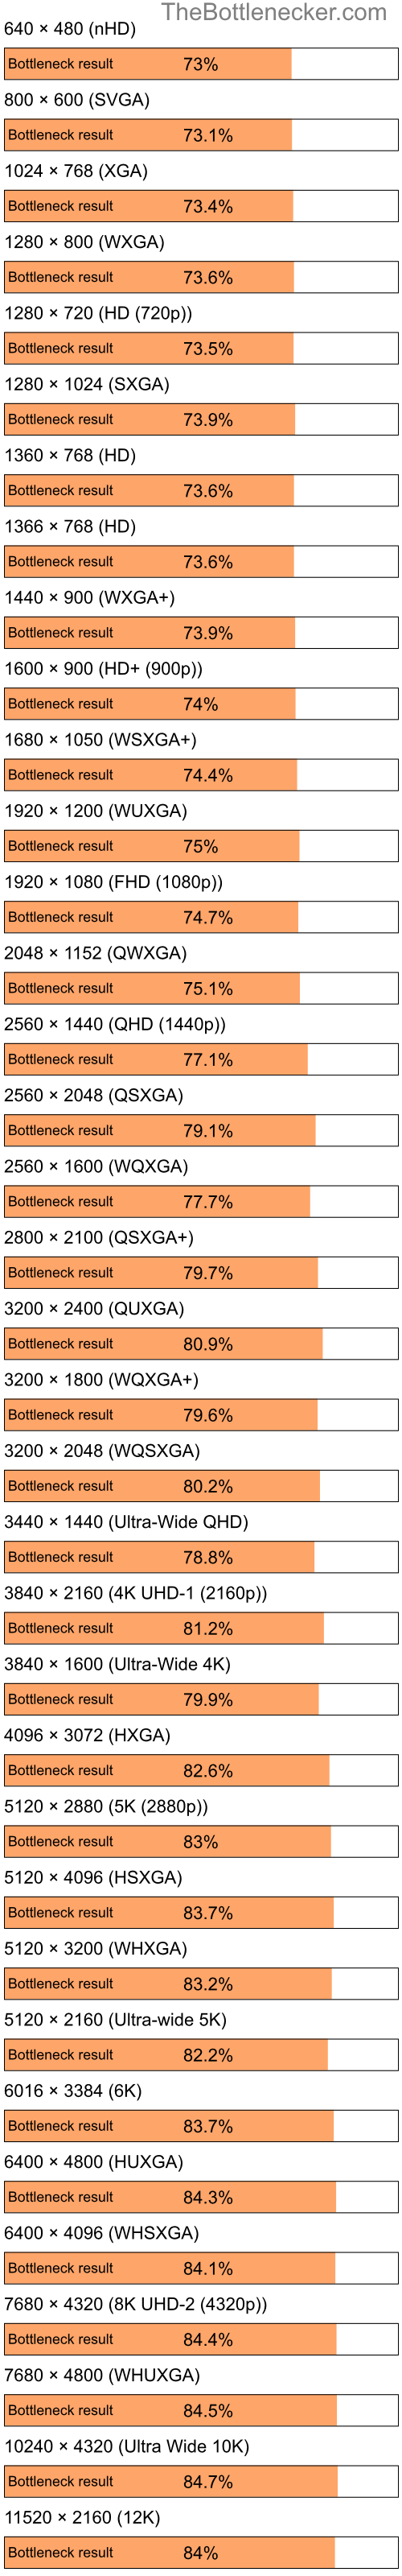 Bottleneck results by resolution for Intel Pentium 4 and NVIDIA nForce 720a in Graphic Card Intense Tasks